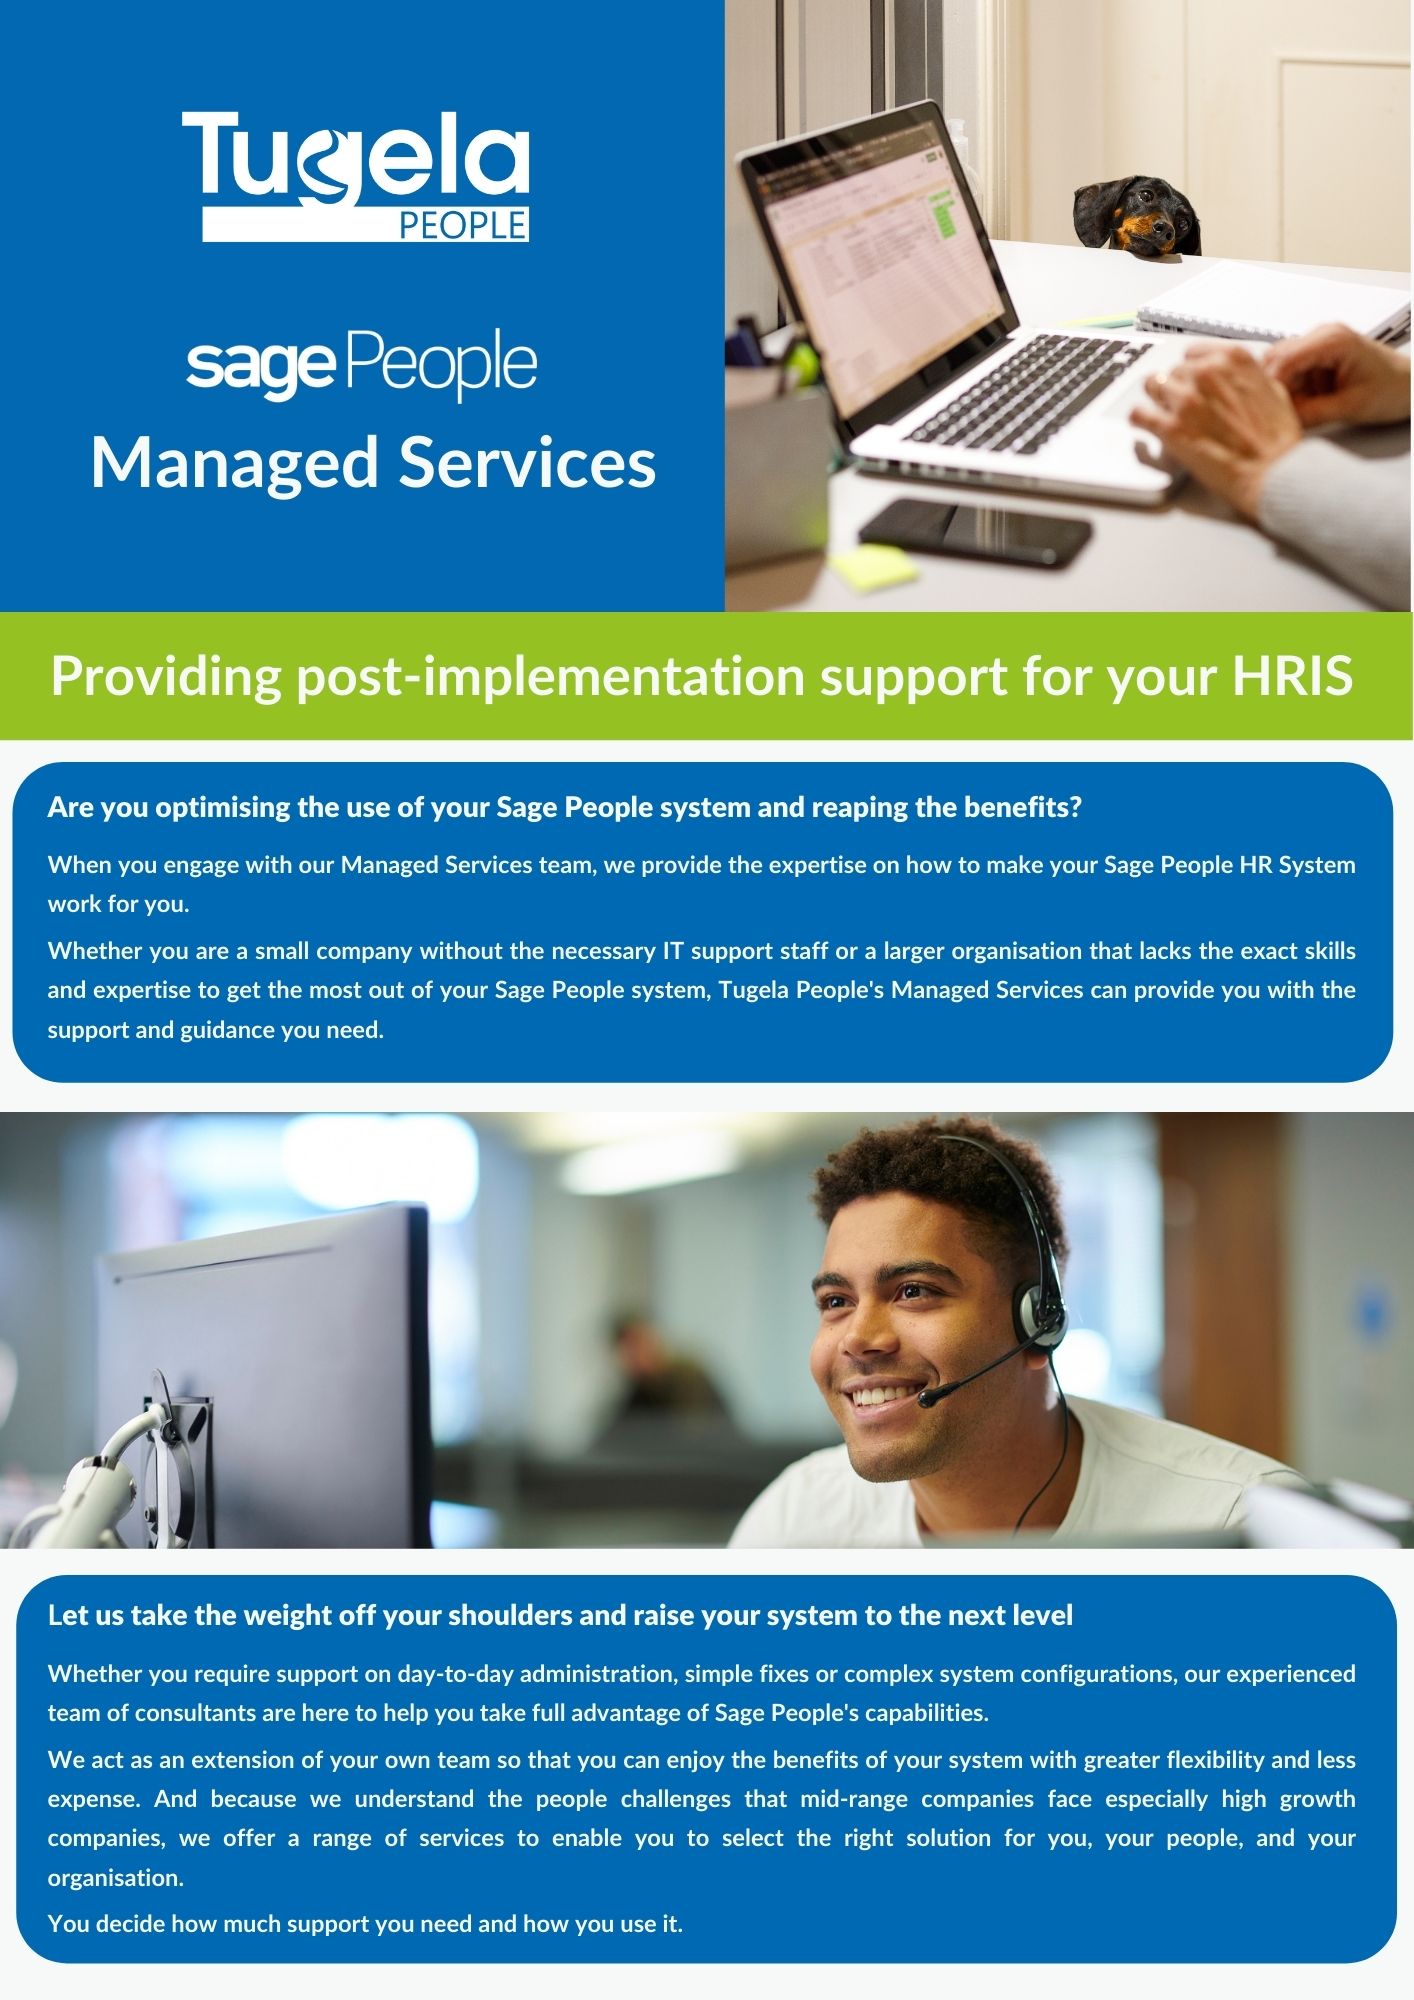 Offering Managed Services support for your Sage People HRIS. Learn more